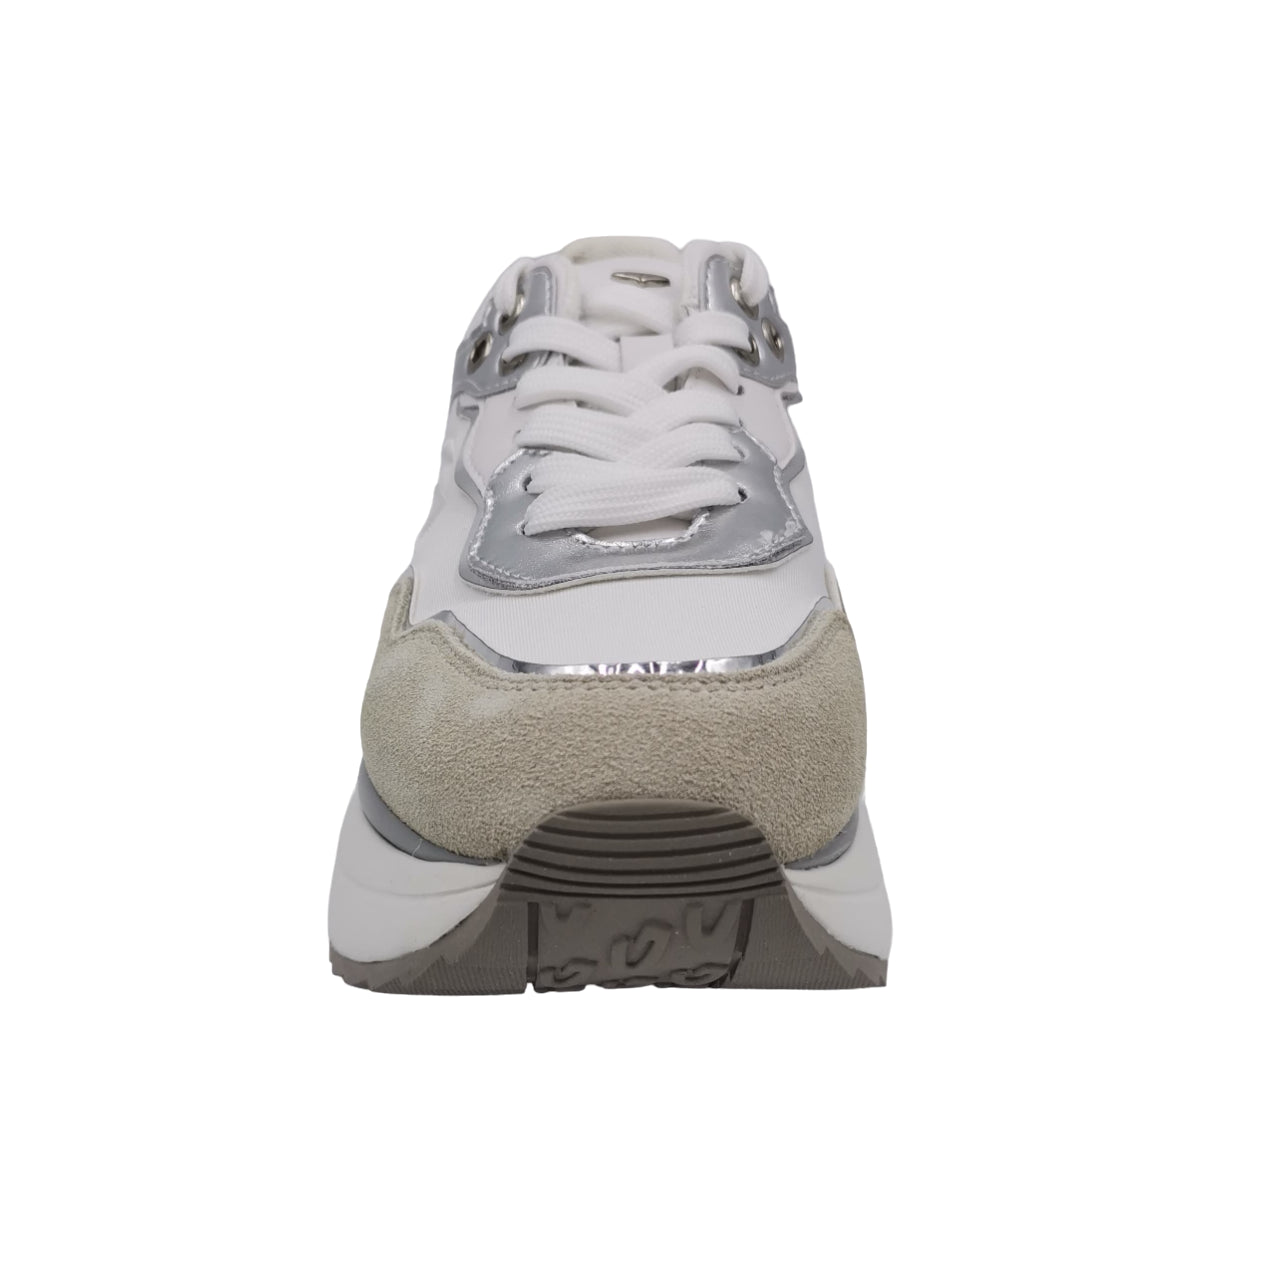 Sneakers GUARDIANI Donna Louise Bianco/beige